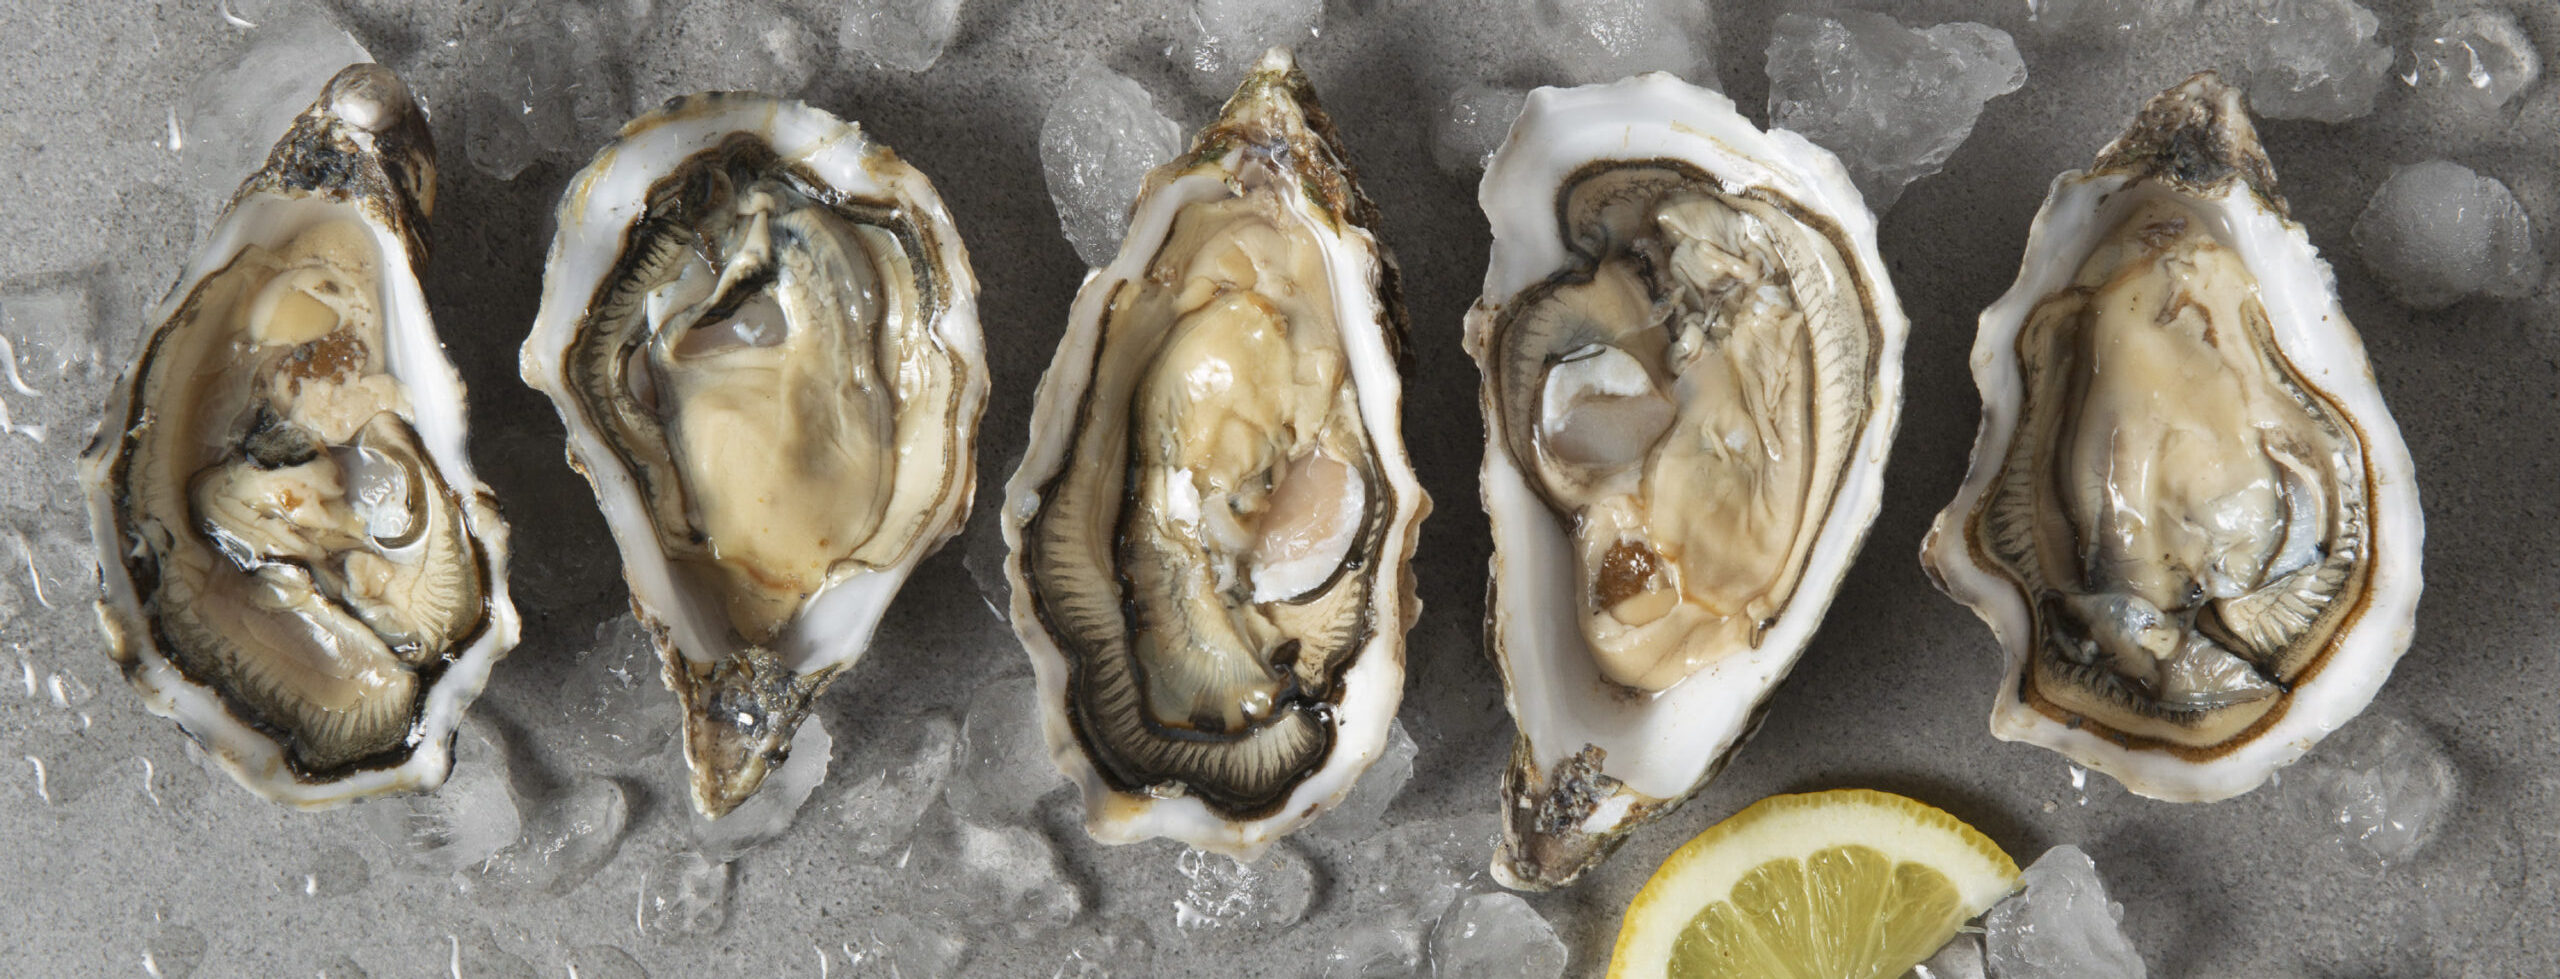 five oysters on ice with a lemon
